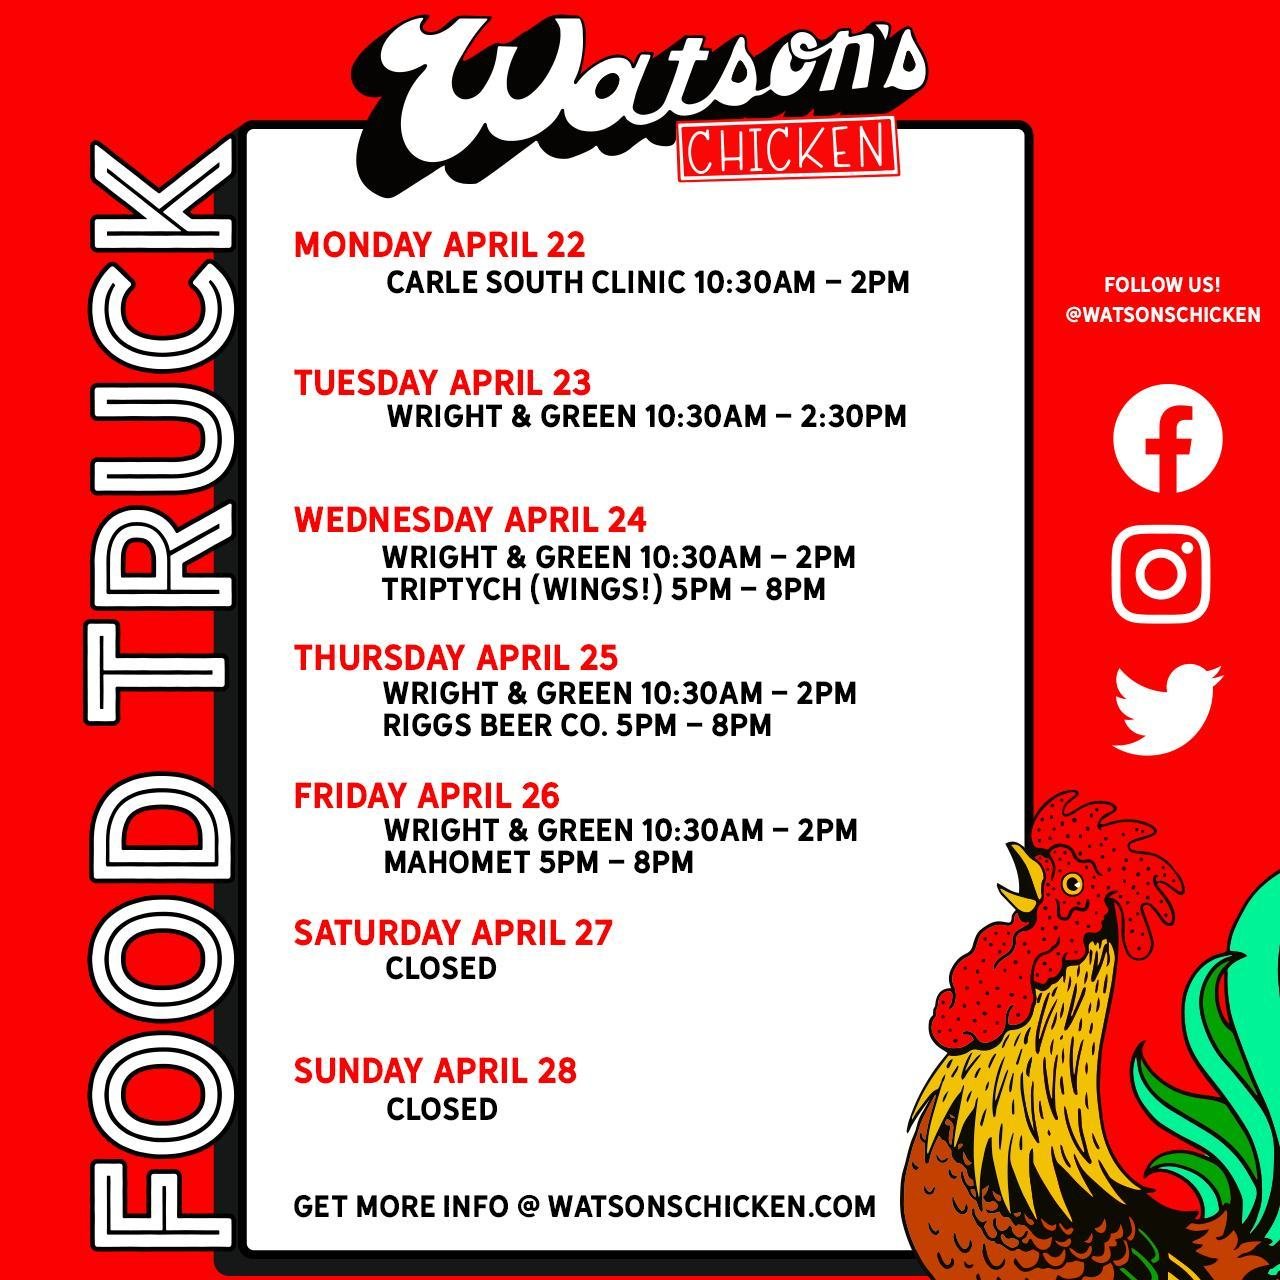 Food Truck Schedule for 4/22 - 4/28. To see the full menu or book the food truck for your event, please visit the link in our bio!